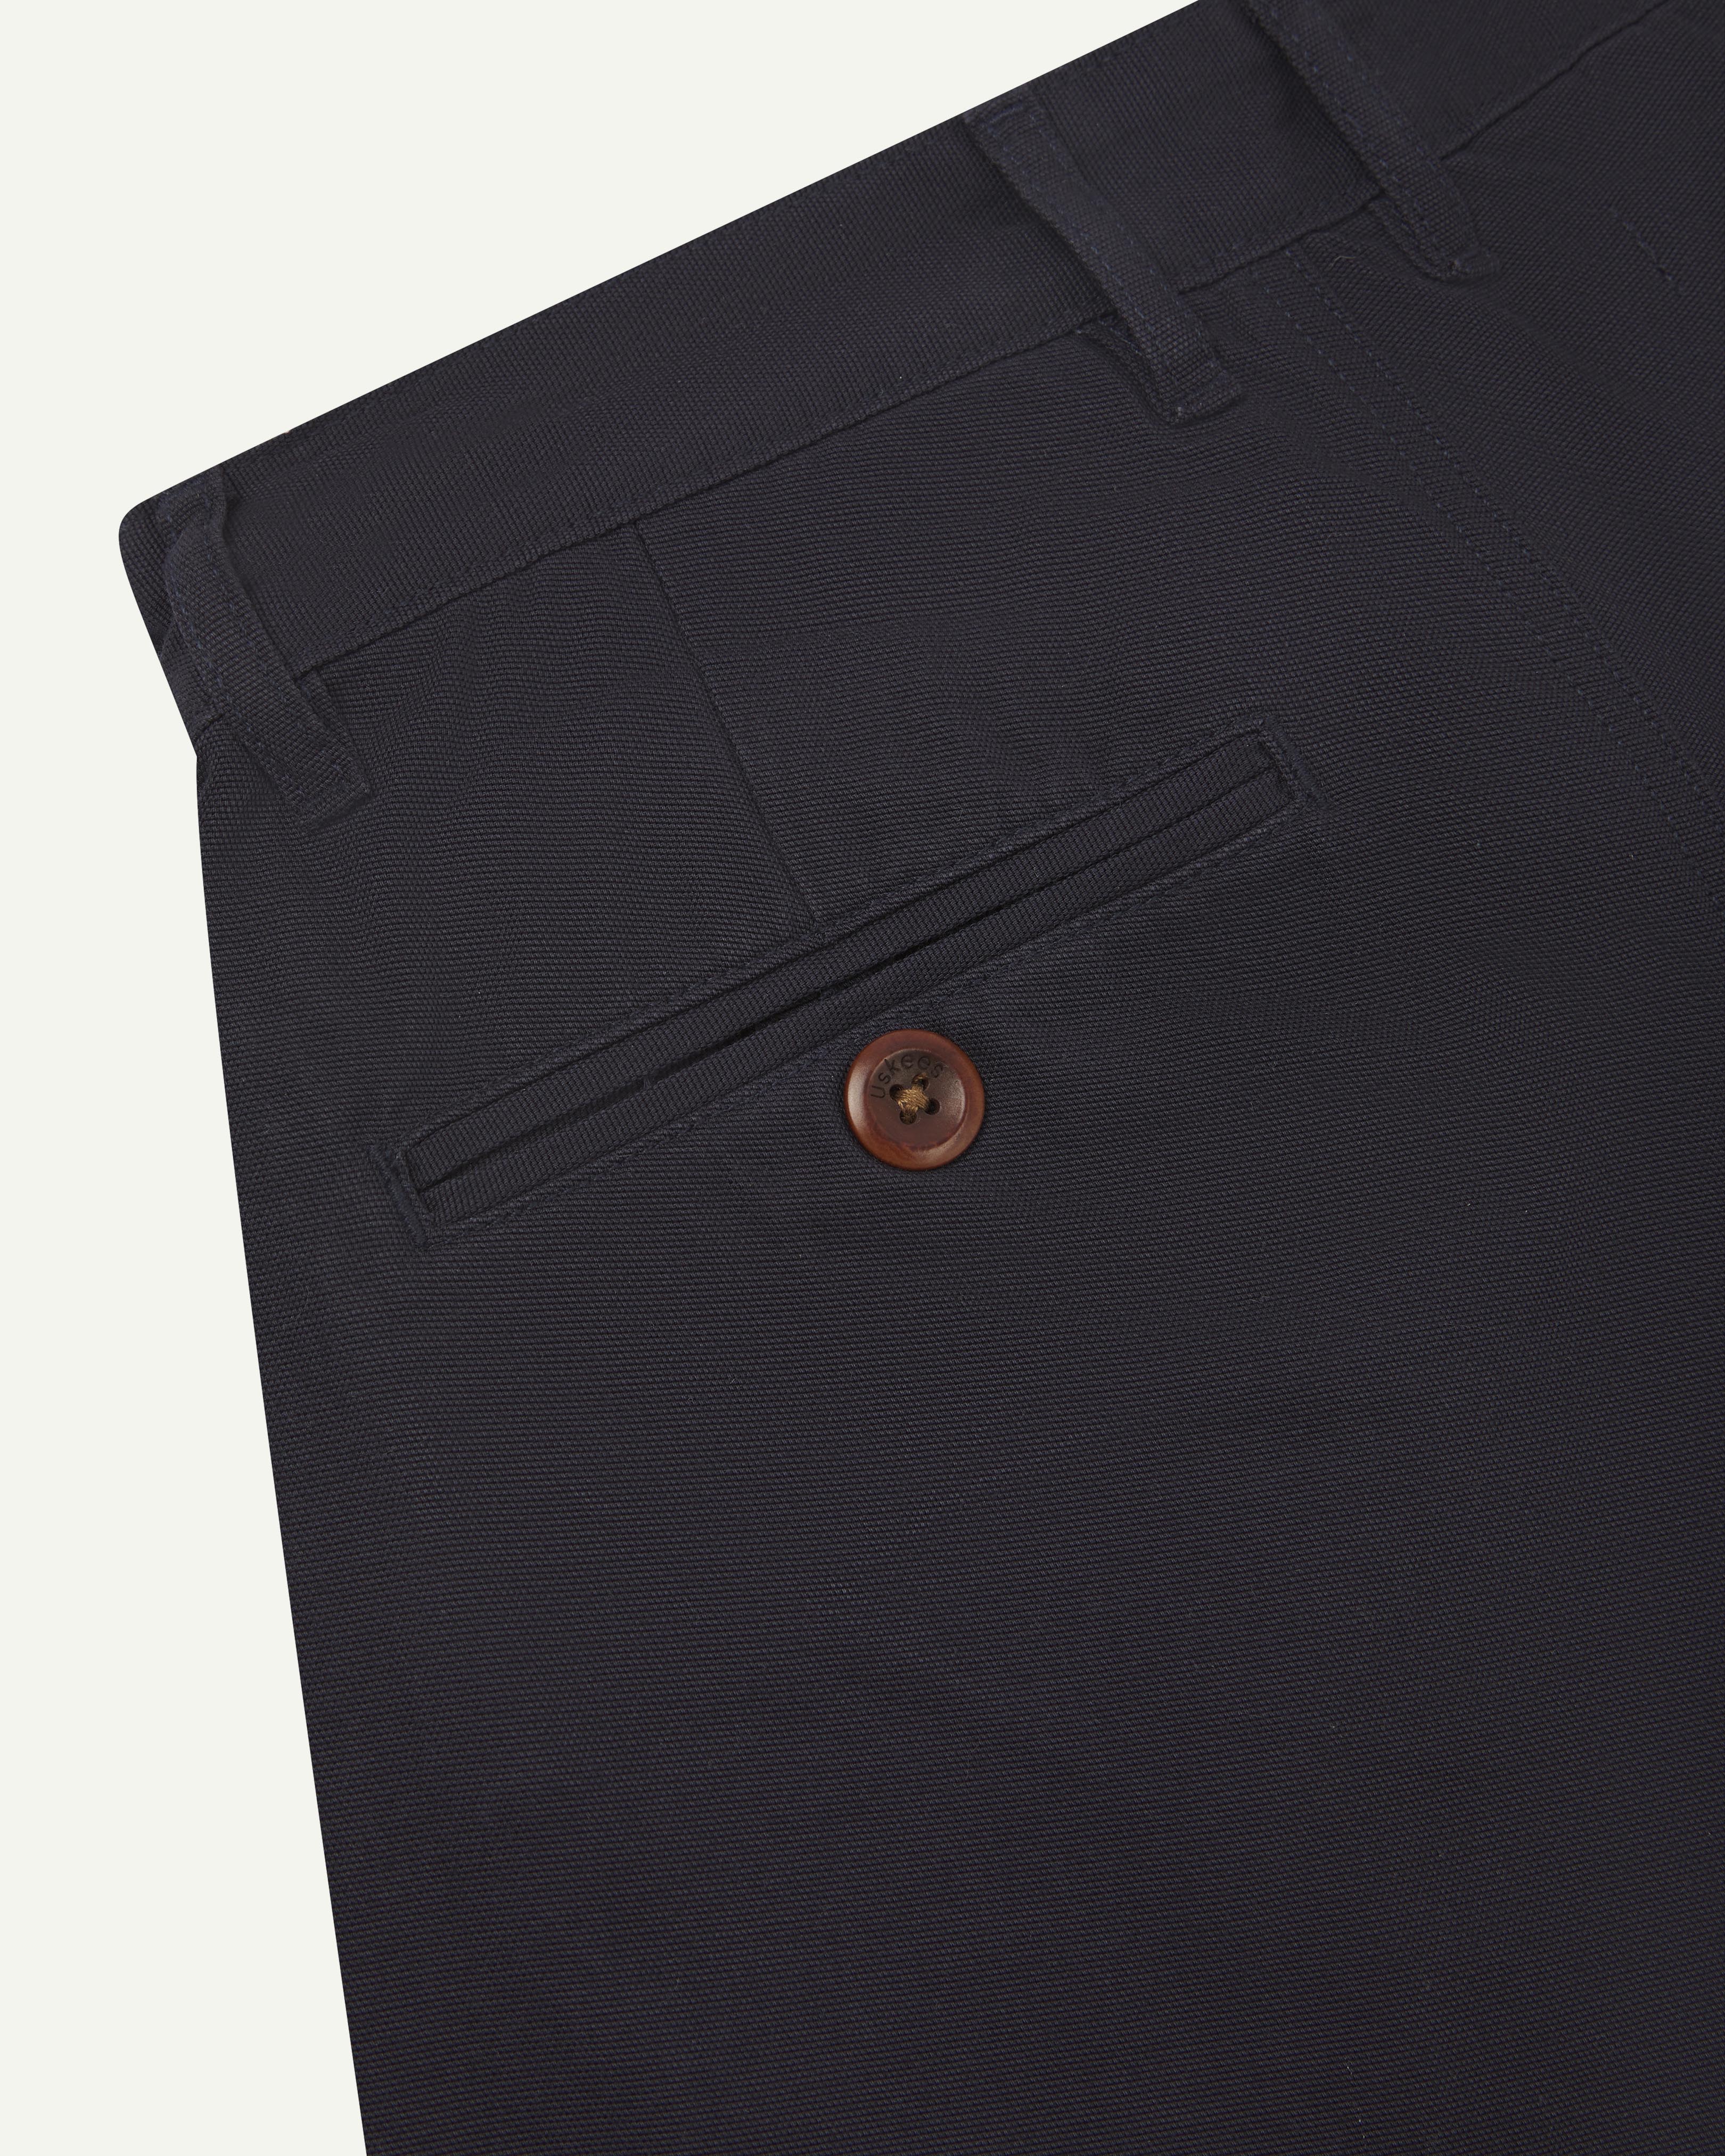 Close-up back view of #5018 Uskees men's organic cotton boat trousers in dark blue showing belt loops and buttoned back pocket.